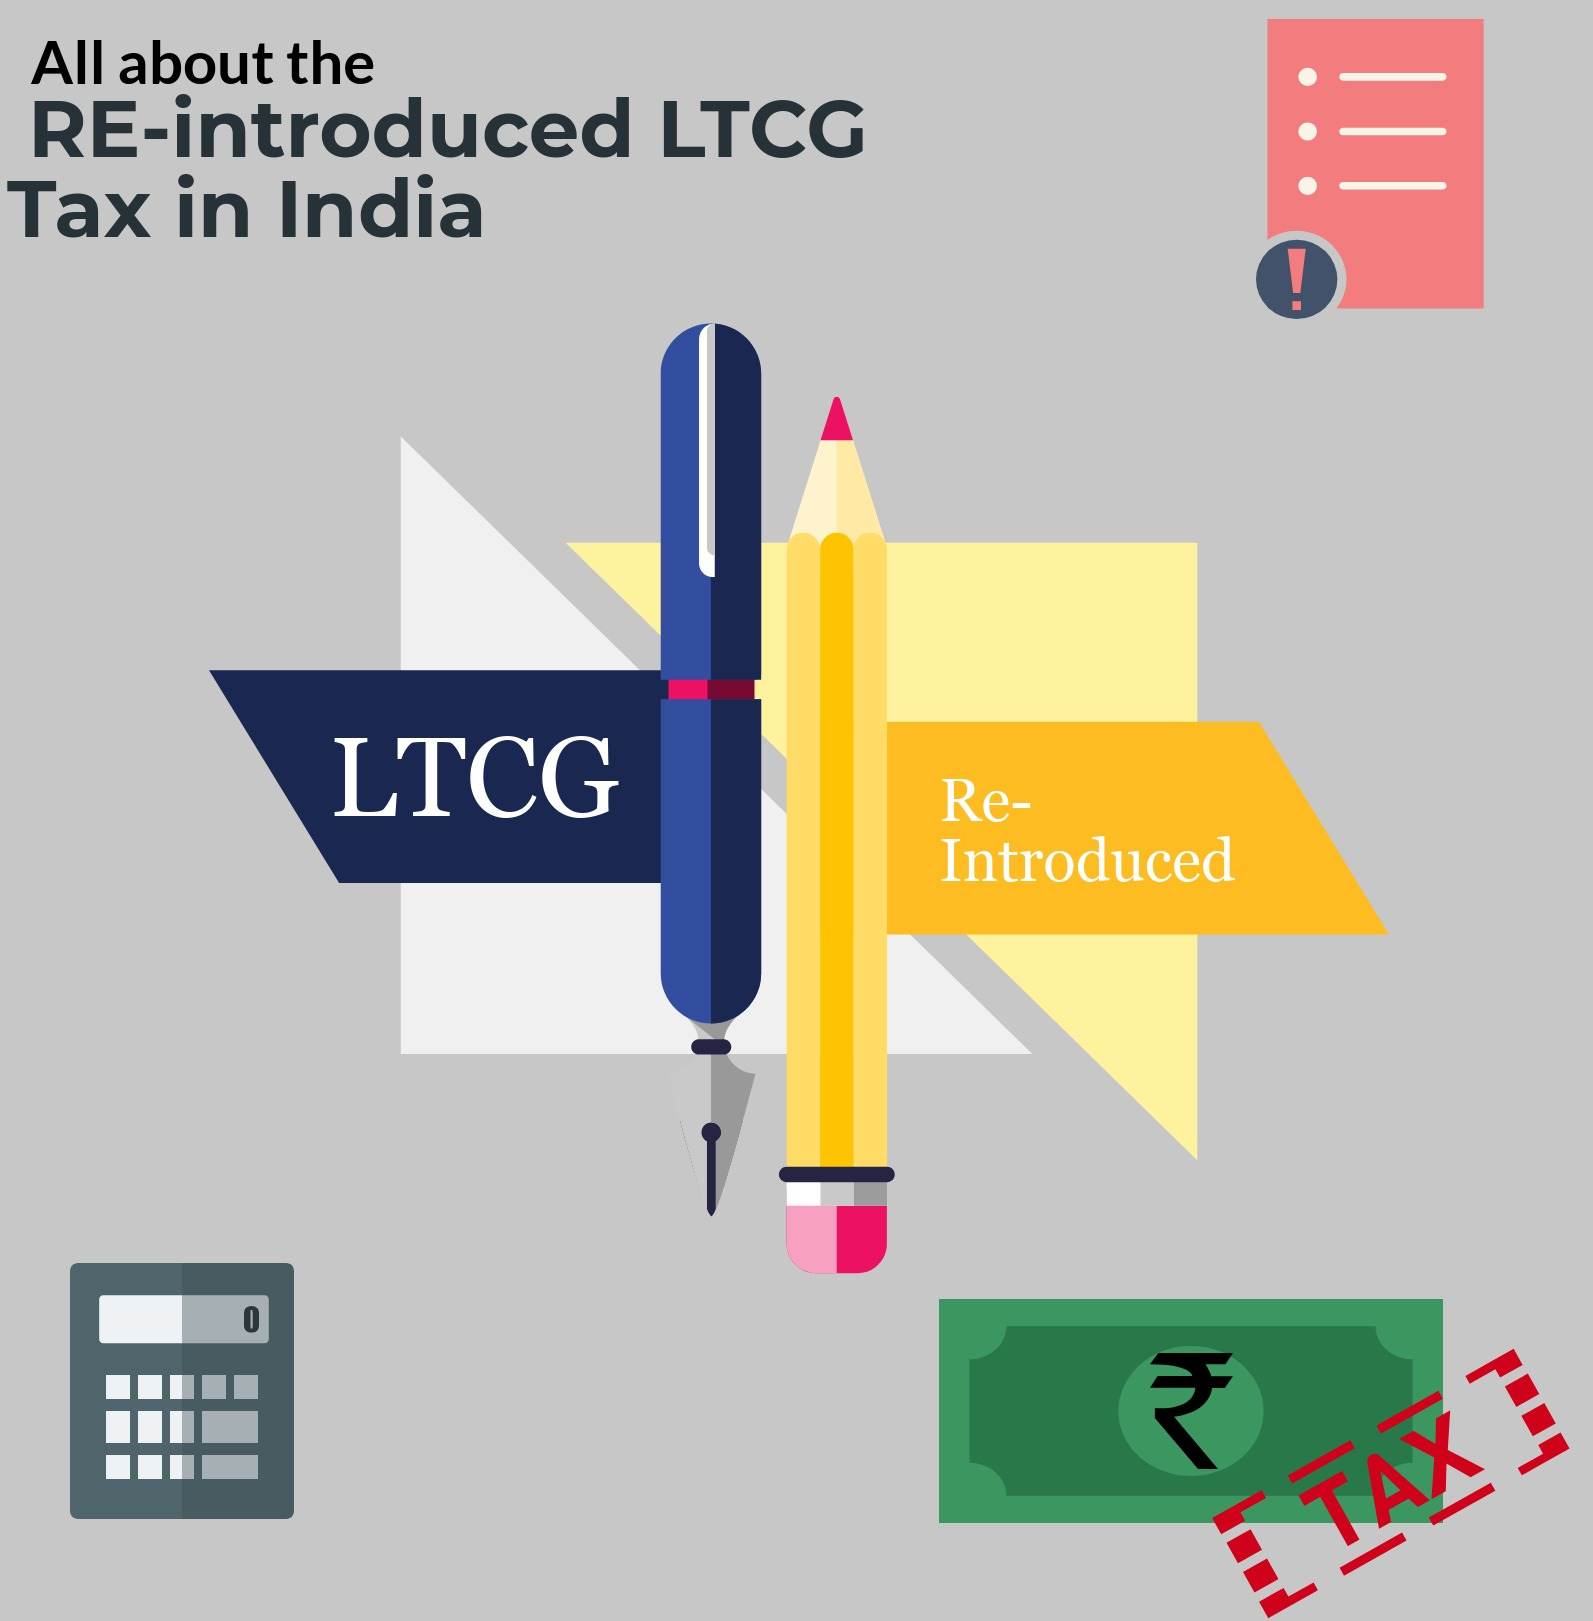 All about the re-introduced Long Term Capital Gains Tax (LTCG tax) in India 3